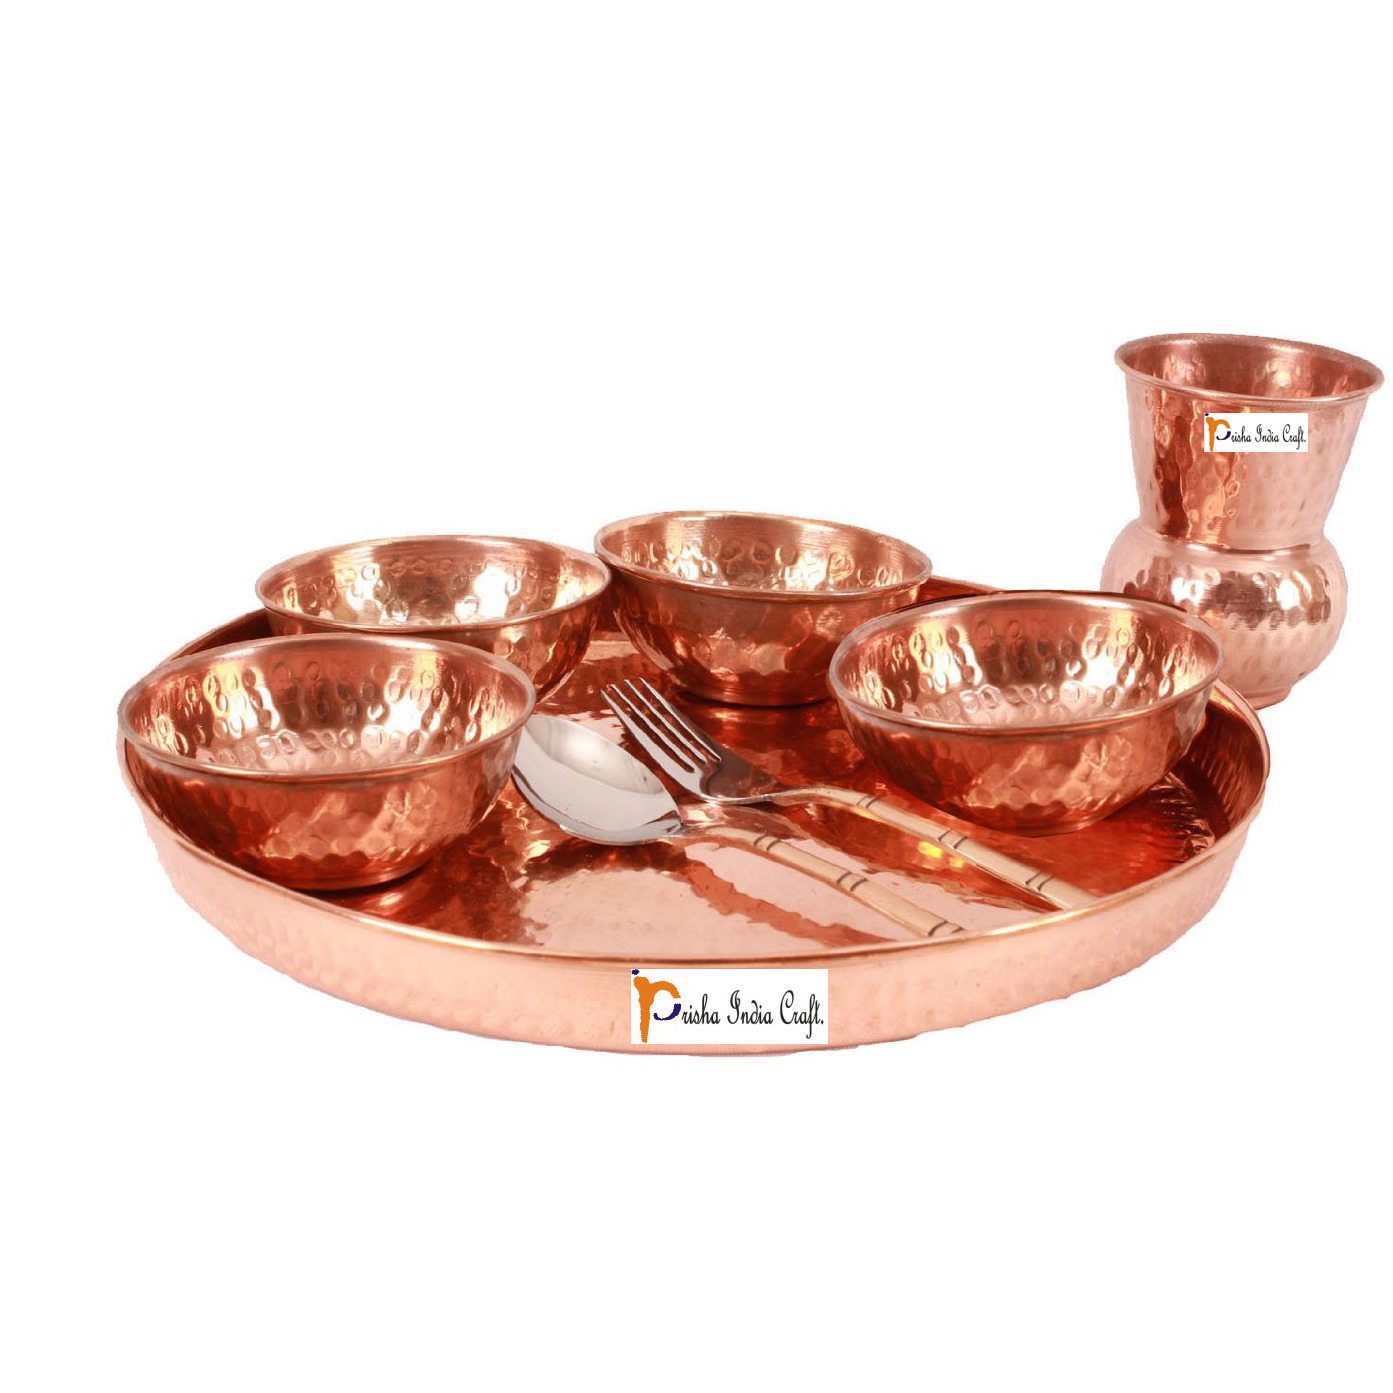 Prisha India Craft B. Set of 6 Dinnerware Traditional 100% Pure Copper Dinner Set of Thali Plate, Bowls, Glass and Spoon, Dia 12  With 1 Luxury Style Pitcher Jug - Christmas Gift